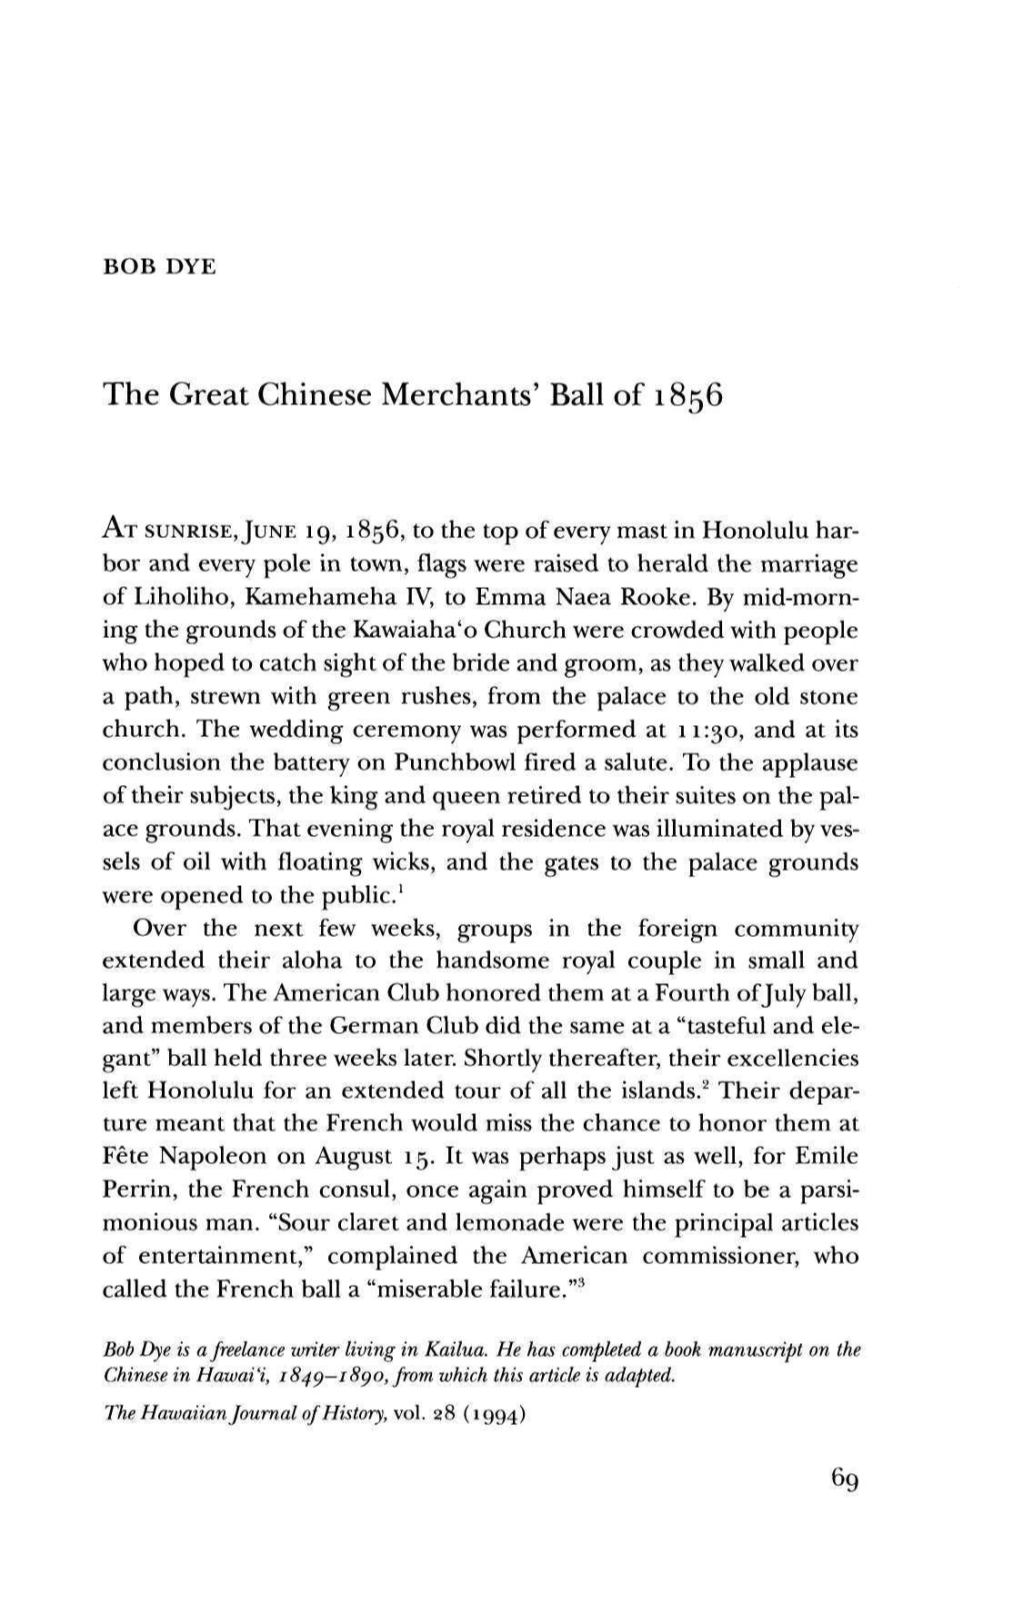 The Great Chinese Merchants' Ball of 1856